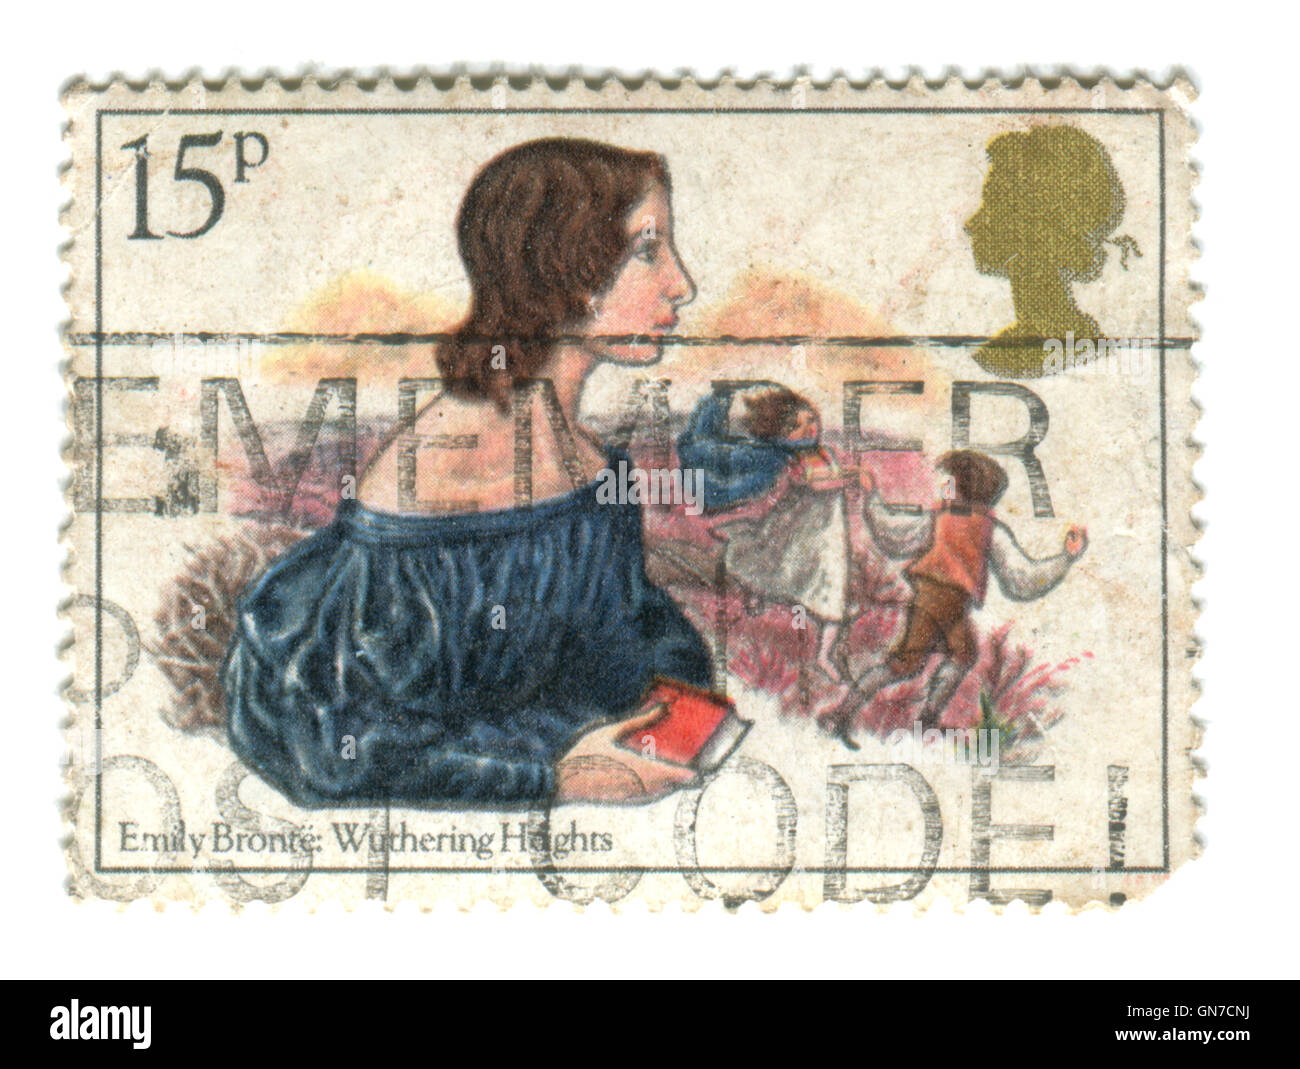 UNITED KINGDOM - CIRCA 1980: A used postage stamp printed in UK, showing Emily Bronte: Wuthering Heights Stock Photo